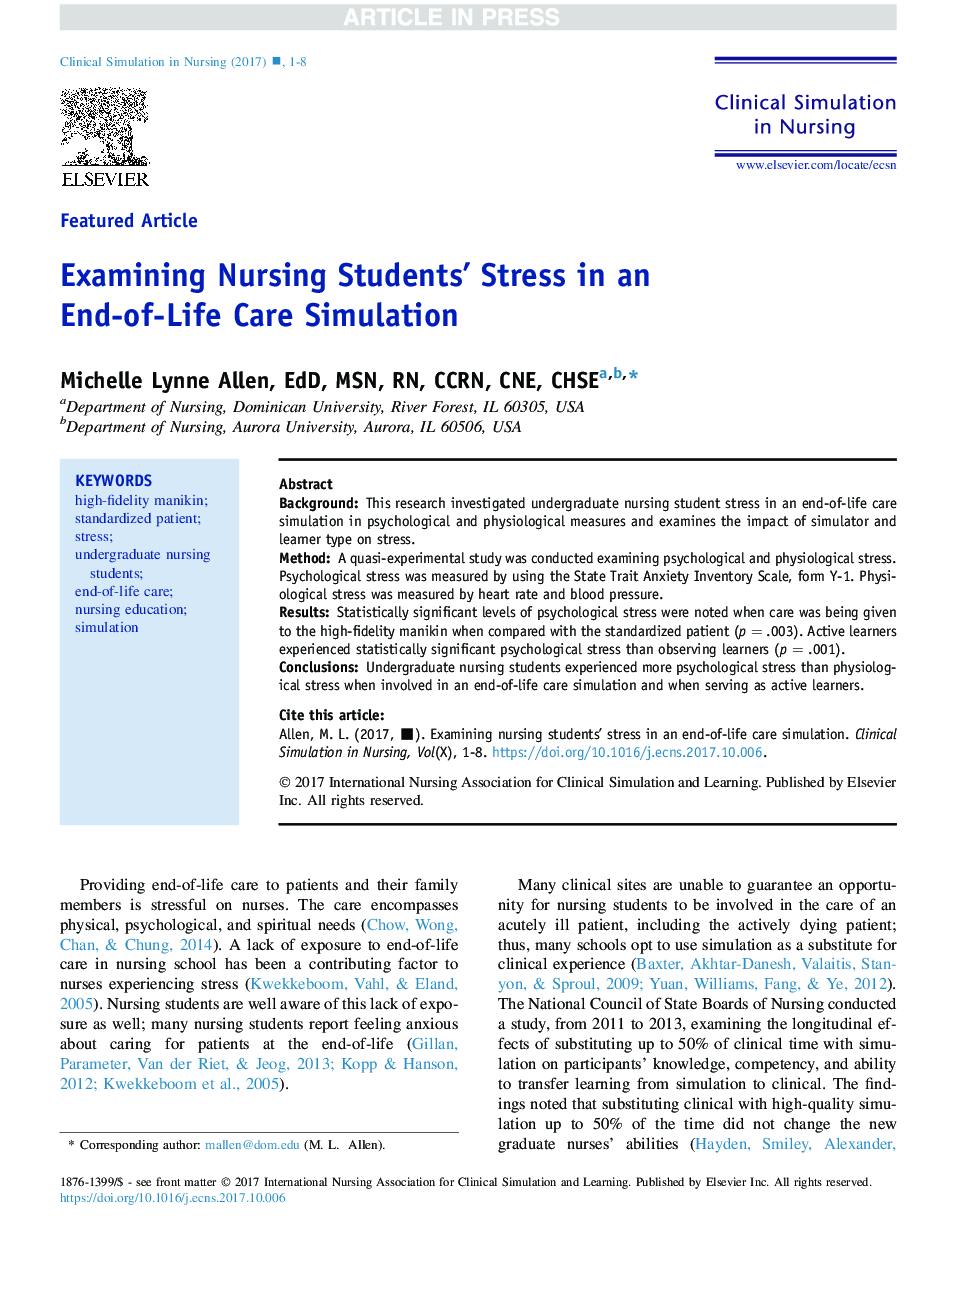 Examining Nursing Students' Stress in an End-of-Life Care Simulation